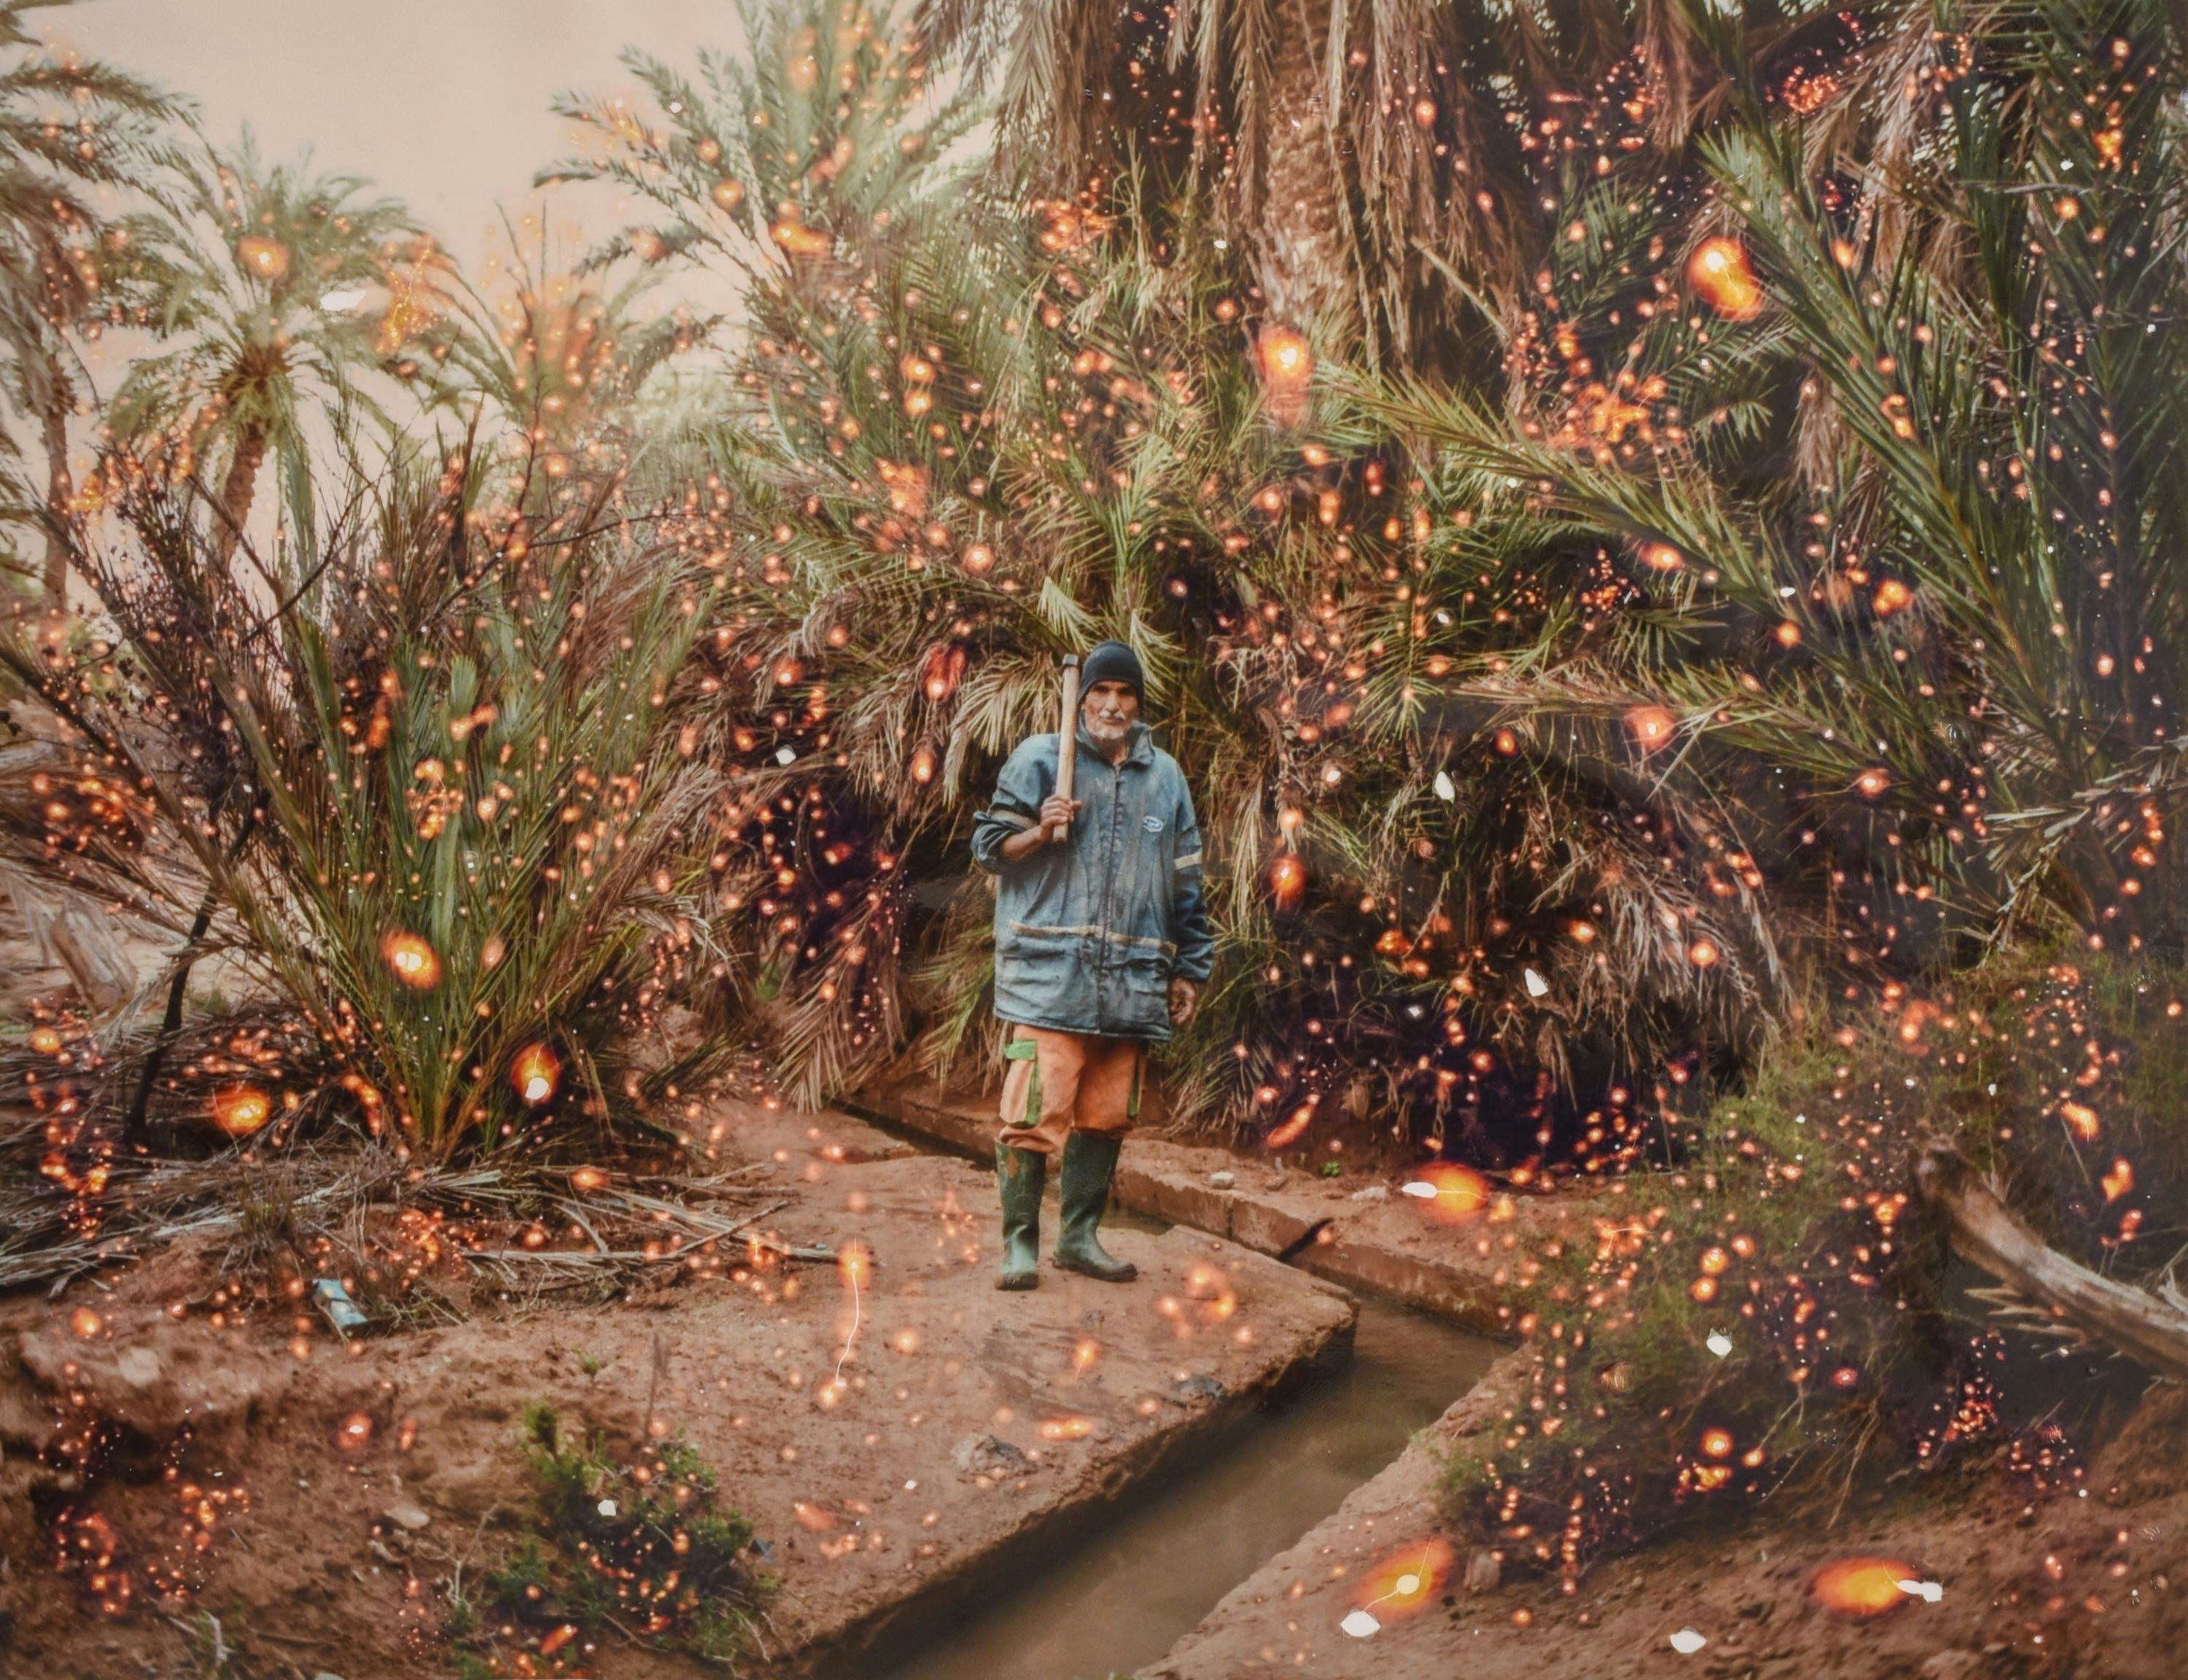 Portrait of a man standing at an oasis in Morocco, surrounded with palm trees. The photo appears to be damaged by fire sparks.